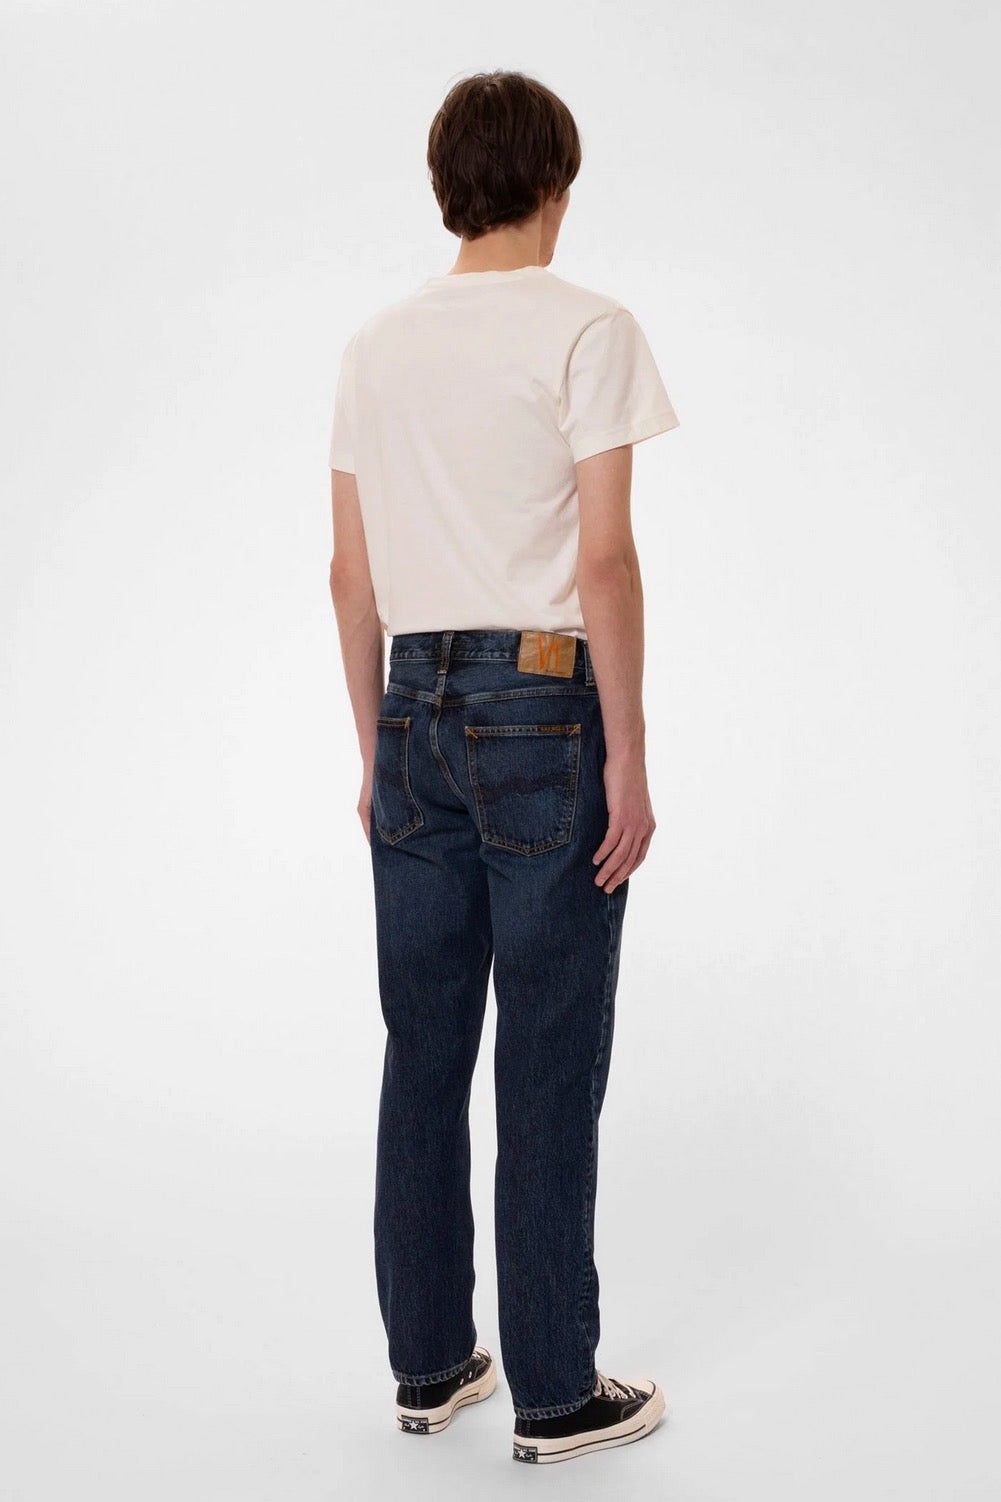 GRITTY JACKSON blue soil | Nudie Jeans